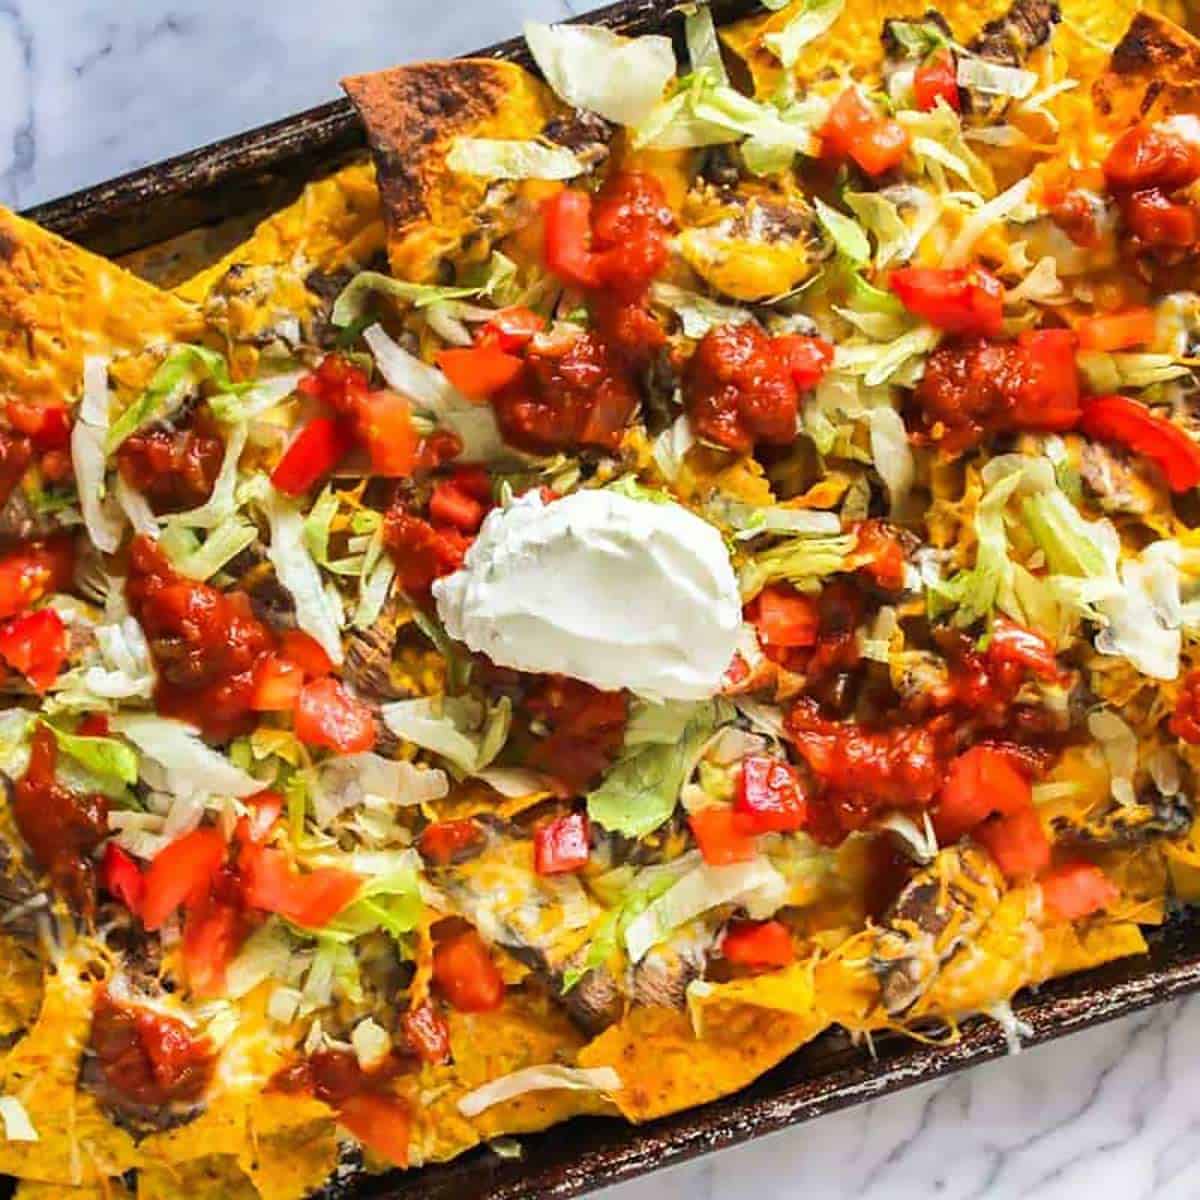 Sheet pan nachos with steak slices, sour cream, tomatoes, and lettuce